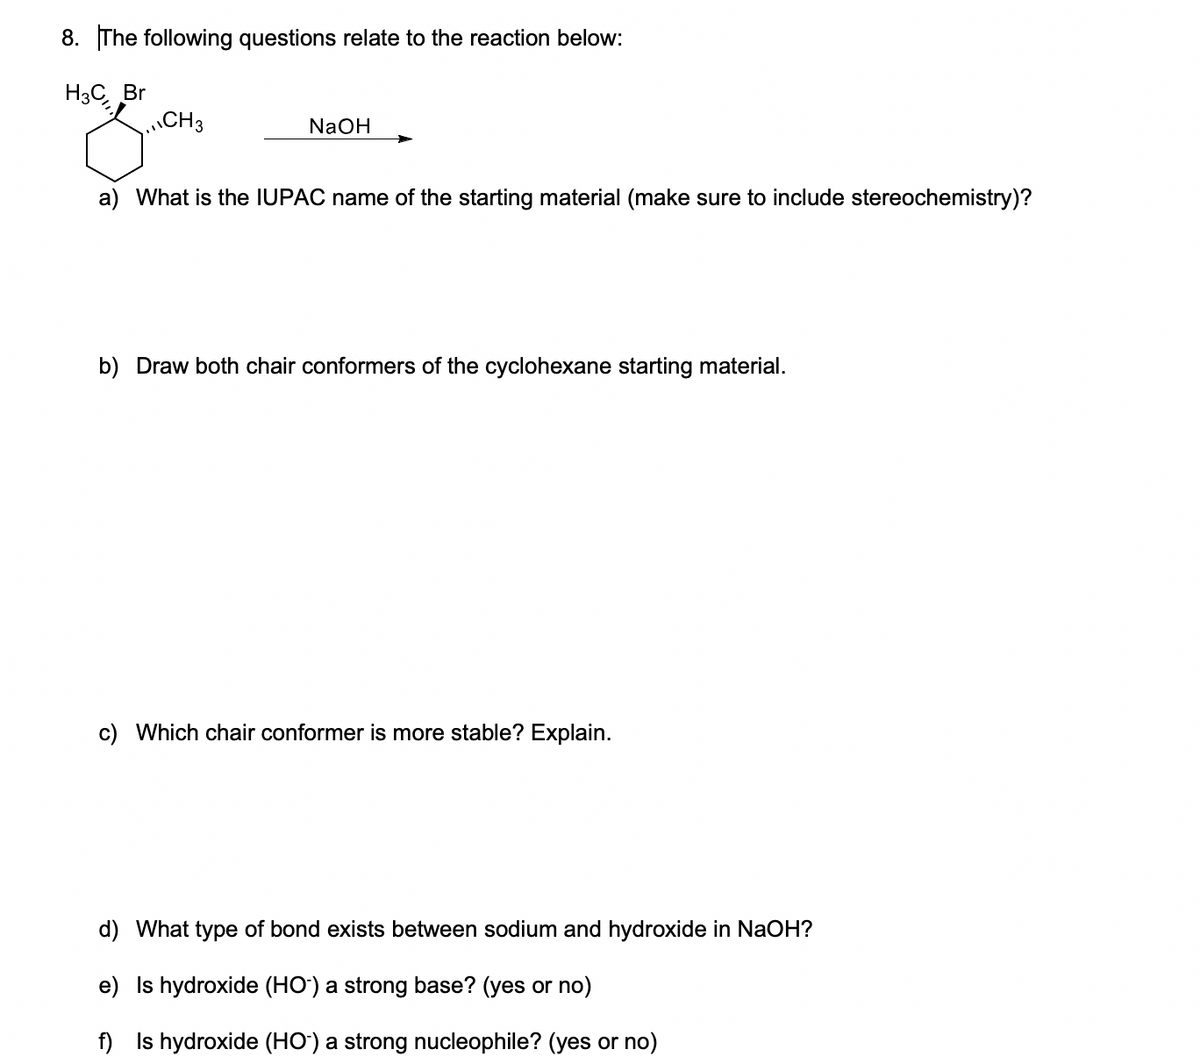 8. The following questions relate to the reaction below:
H3C Br
CH3
NaOH
a) What is the IUPAC name of the starting material (make sure to include stereochemistry)?
b) Draw both chair conformers of the cyclohexane starting material.
c) Which chair conformer is more stable? Explain.
d) What type of bond exists between sodium and hydroxide in NaOH?
e) Is hydroxide (HO') a strong base? (yes or no)
f) Is hydroxide (HO') a strong nucleophile? (yes or no)
